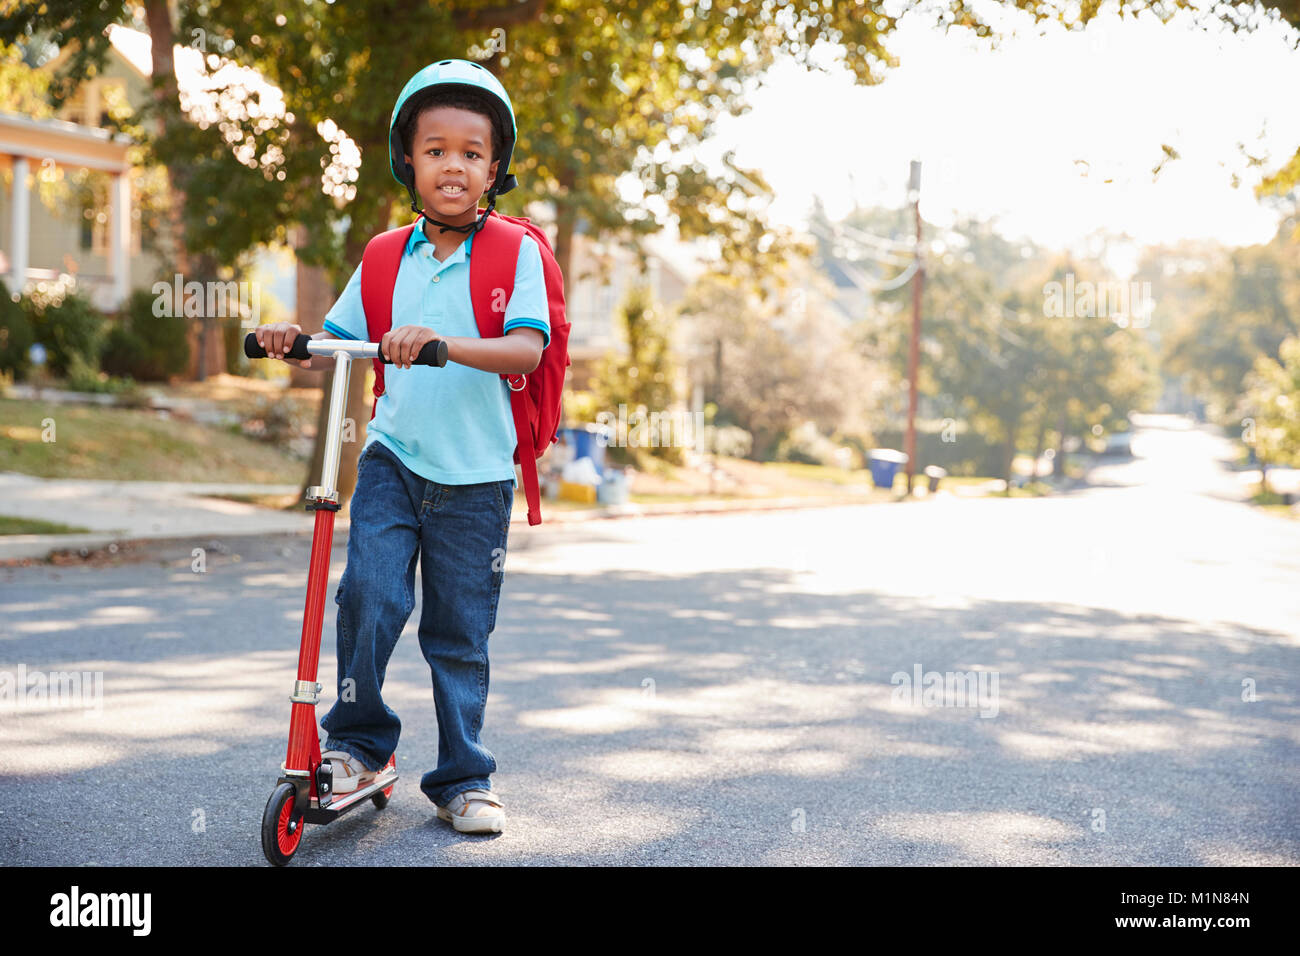 Young Boy Riding Scooter Along Street To School Stock Photo